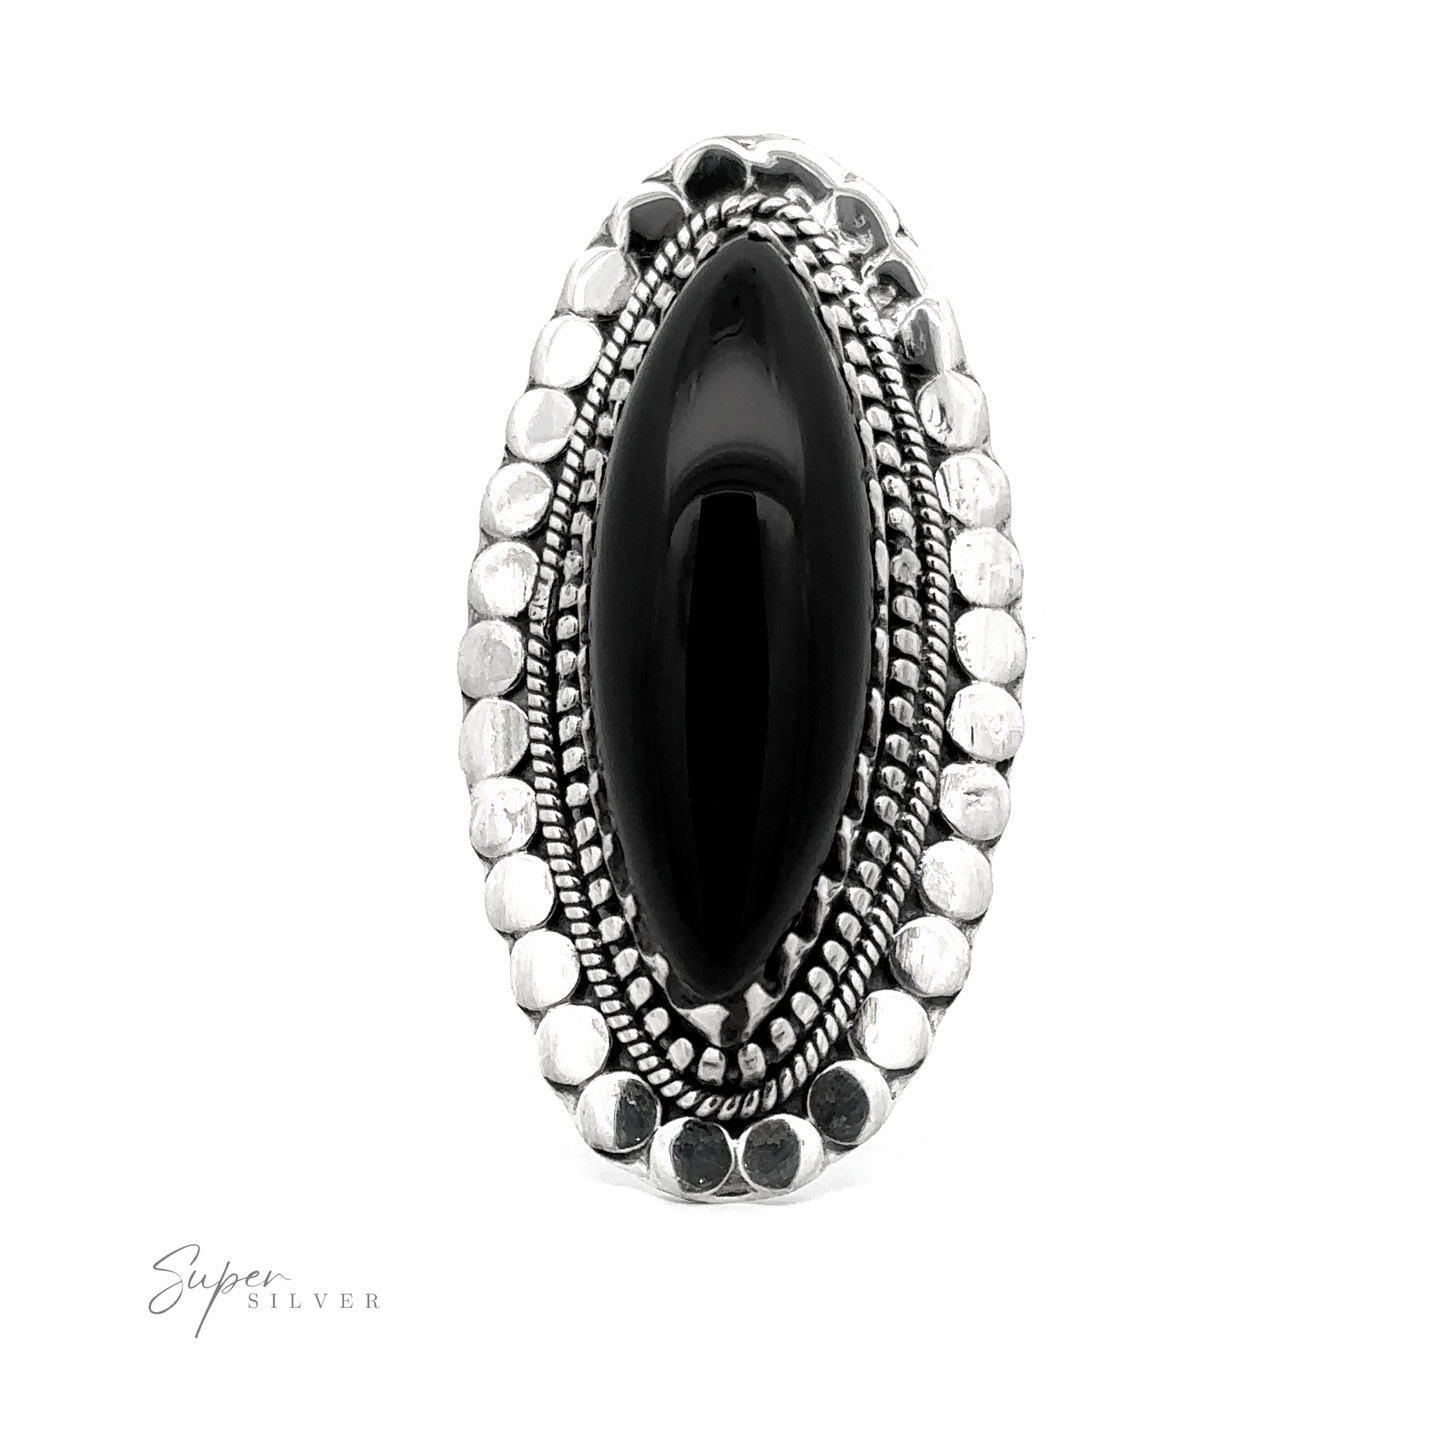 
                  
                    A Statement Marquise Shaped Gemstone Ring featuring a large, oval black gemstone, encircled by ornate, intricate silver detailing. The words "Super Silver" are visible at the bottom left corner, making this Bohemian jewelry piece truly stand out.
                  
                